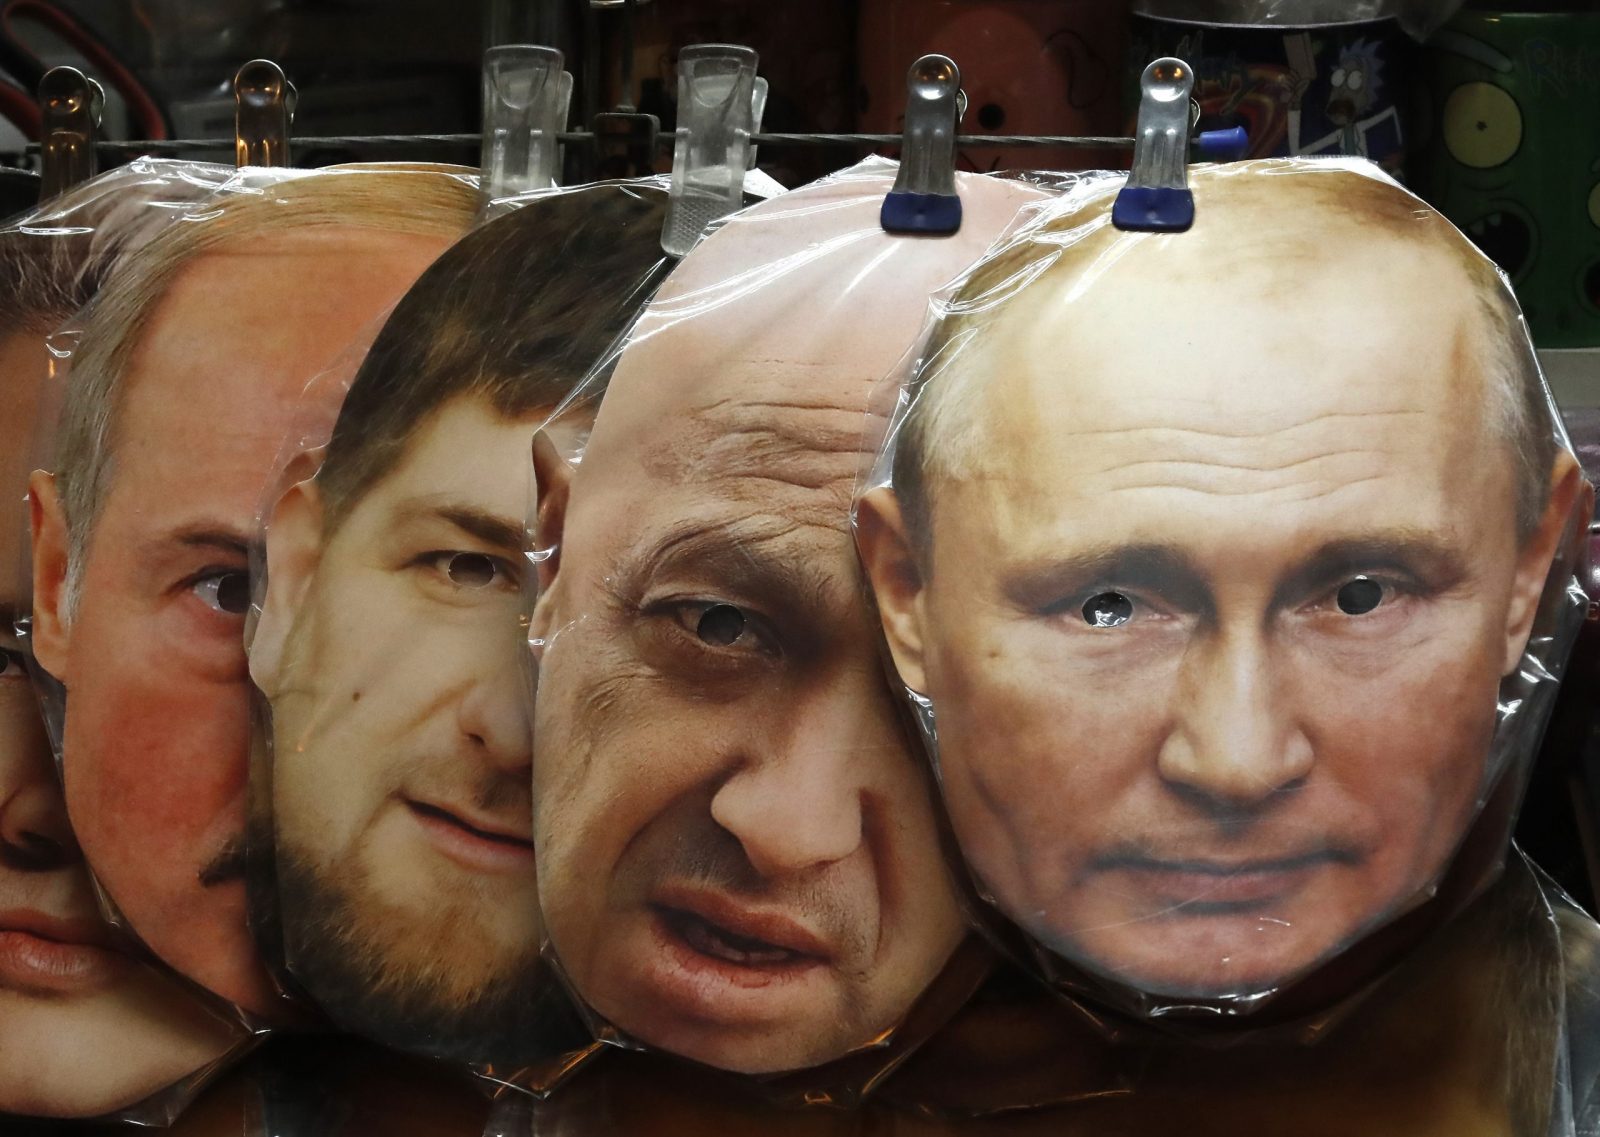 epa10674462 Face masks depicting (from-R) Russian President Vladimir Putin, owner of PMC (Private Military Company) Wagner Yeugeny Prigozhin, Chechen's regional leader Ramzan Kadyrov and Belarusian President Alexander Lukashenko are displayed for sale at a souvenir market in central St. Petersburg, Russia, 05 June 2023. On 24 February 2022 Russian troops entered the Ukrainian territory in what the Russian president declared a 'Special Military Operation', starting an armed conflict that has provoked destruction and a humanitarian crisis.  EPA/ANATOLY MALTSEV